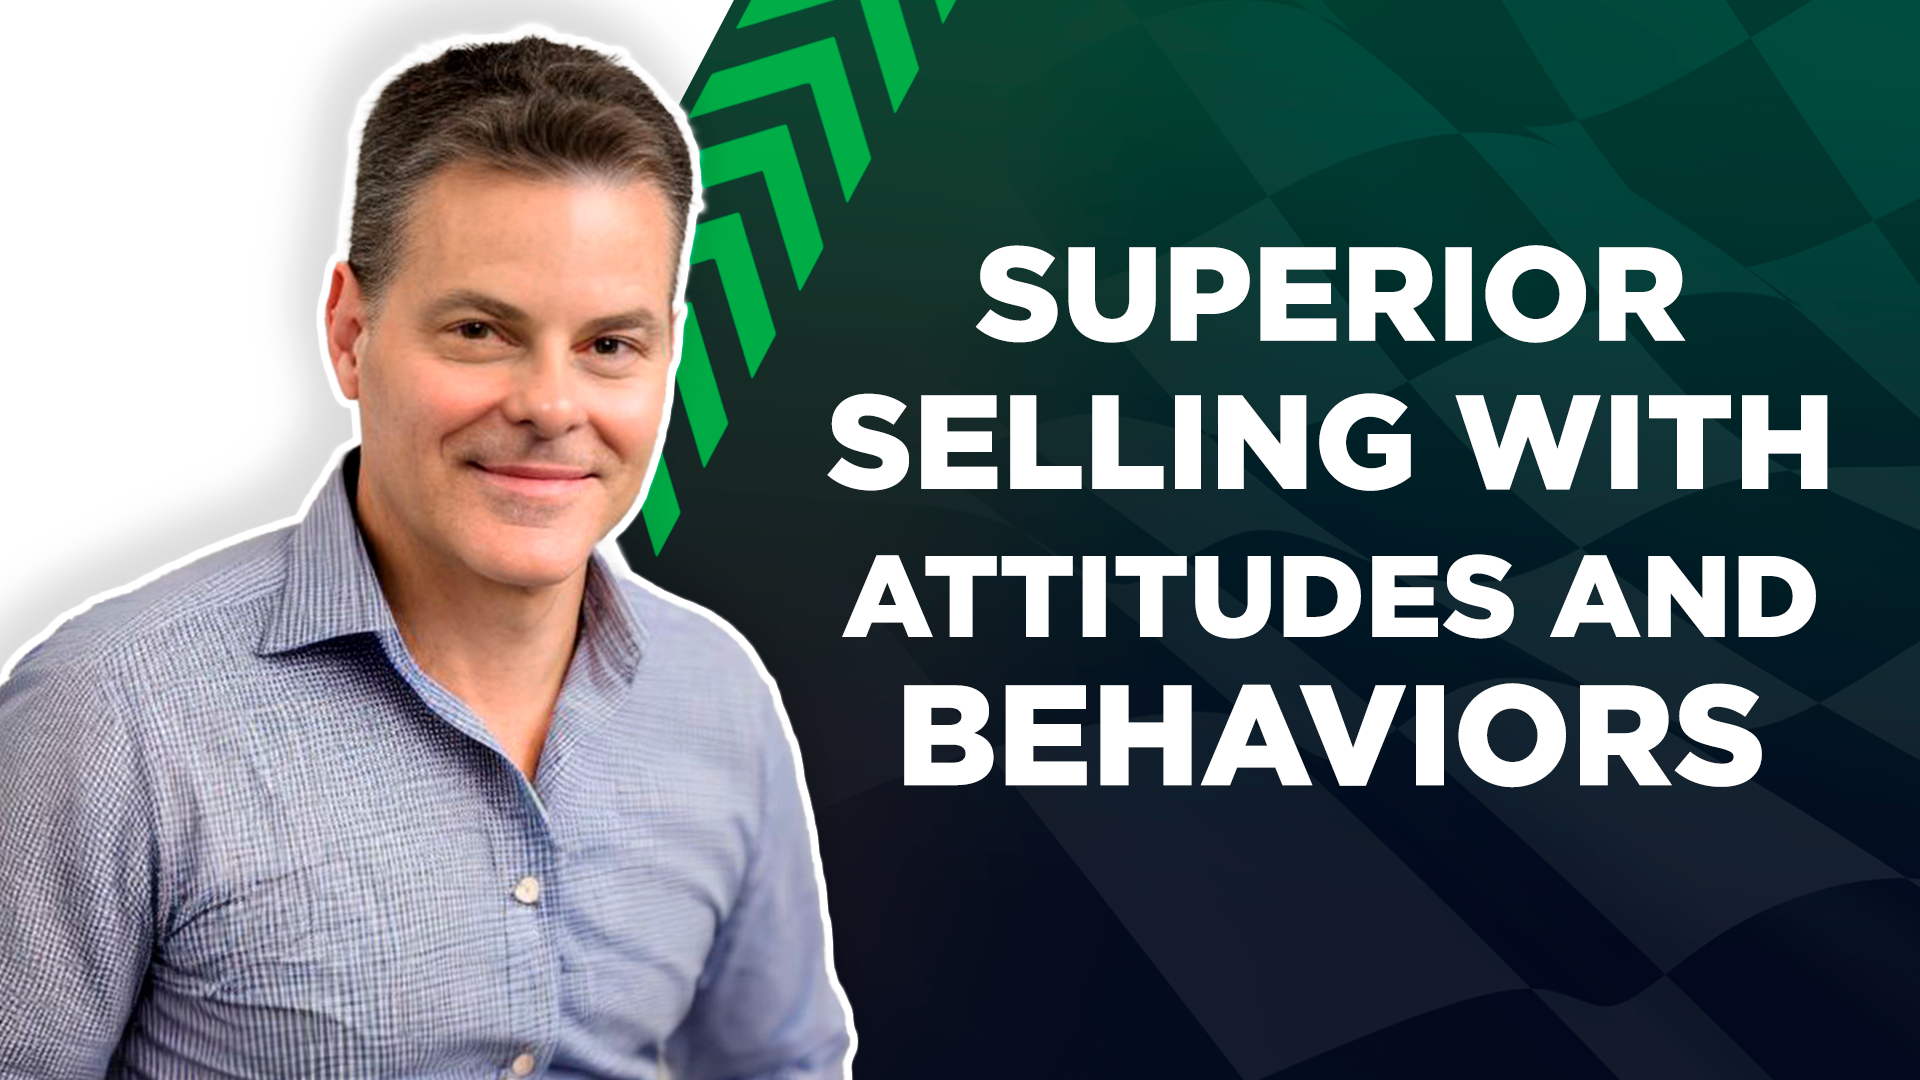 Podcast Pit Stop: Matthew Neuberger on Superior Selling with Attitudes and Behaviors